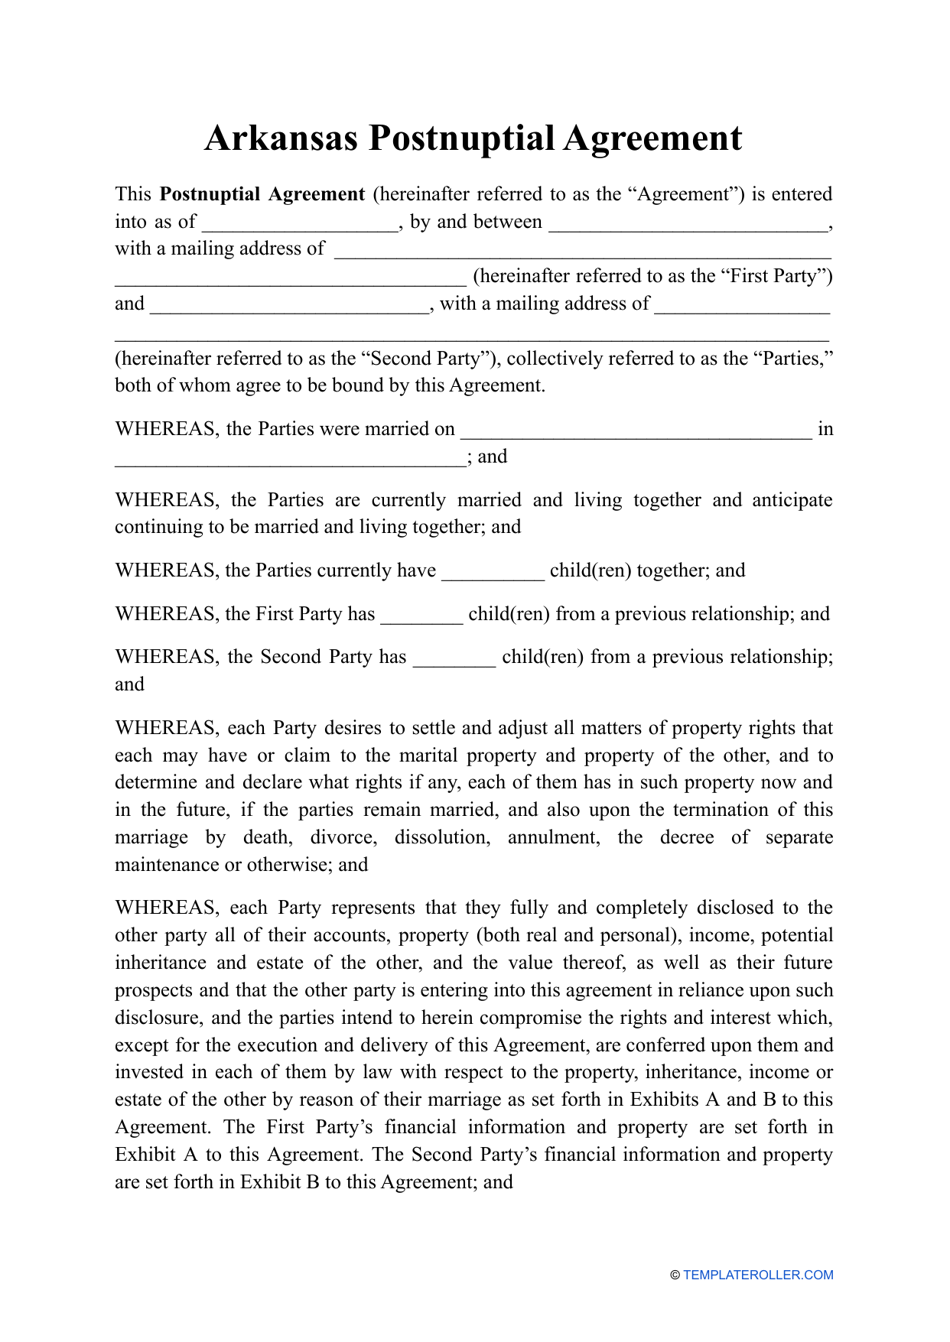 Postnuptial Agreement Template - Arkansas, Page 1